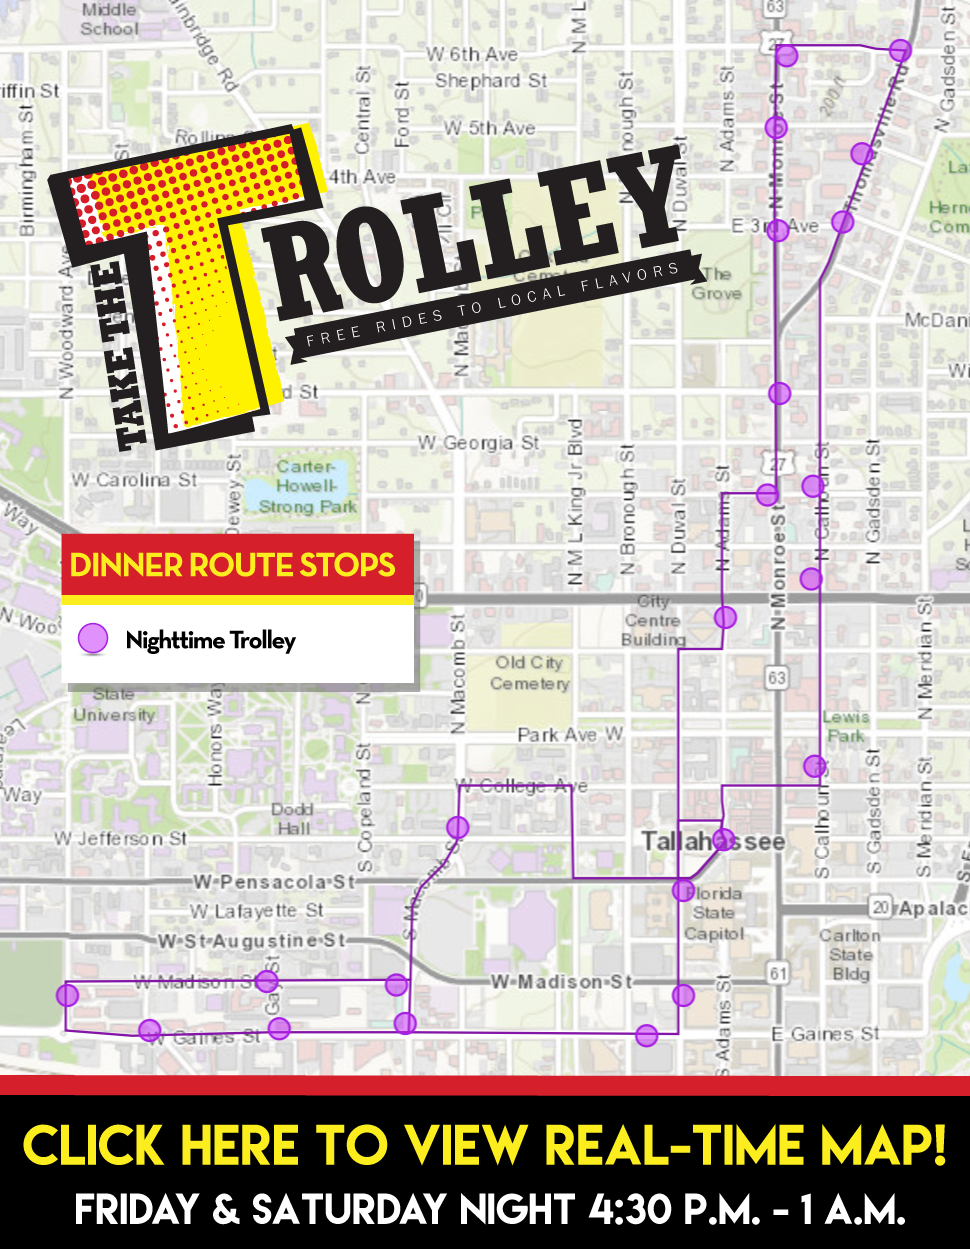 Trolley Dinner Route Map